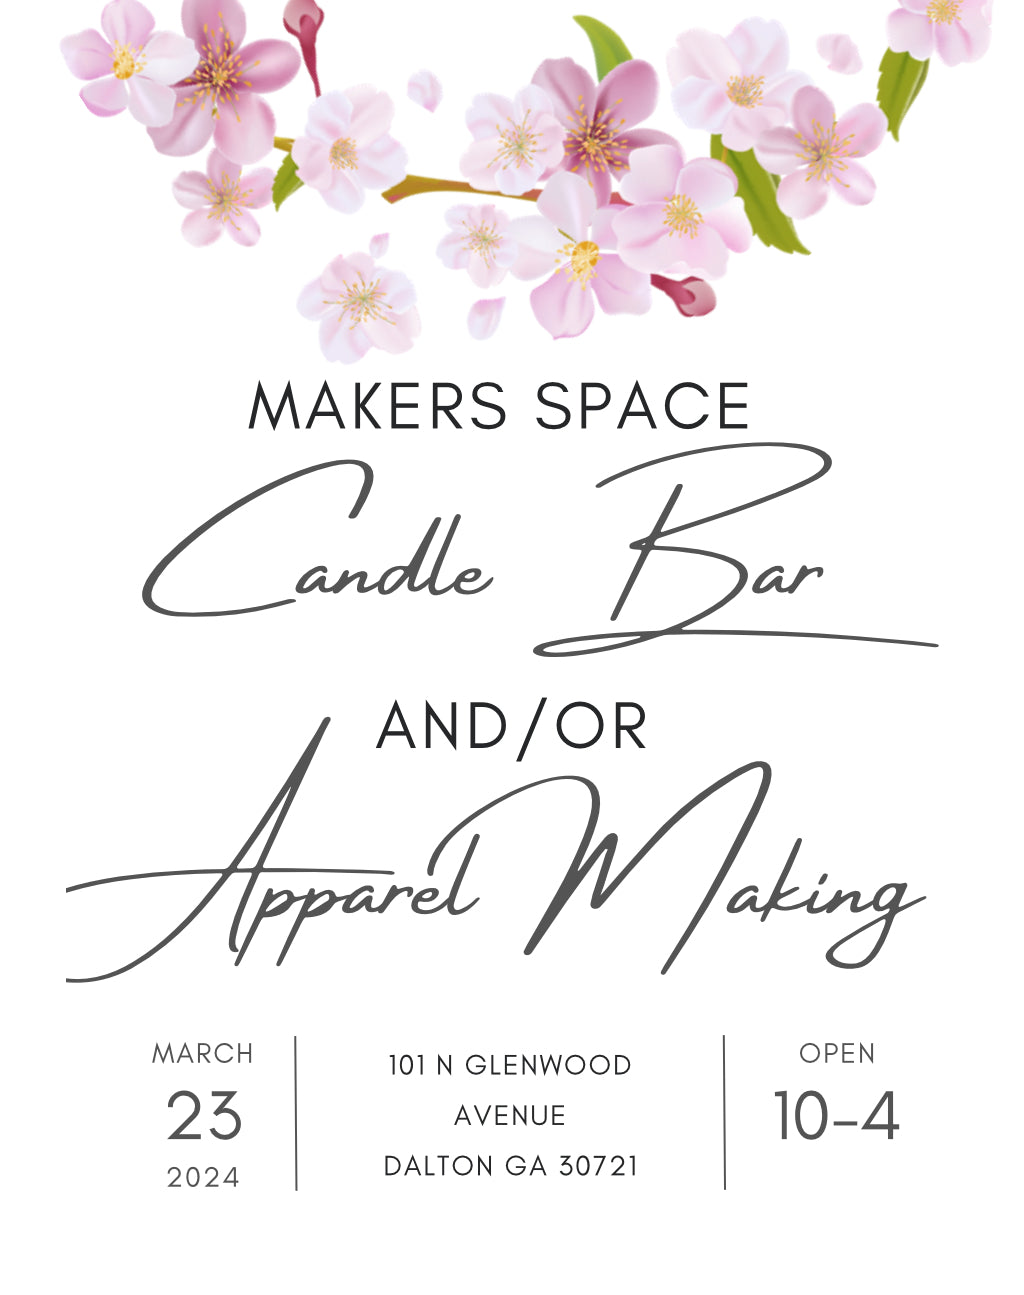 Makers Space (Candle Bar &/or apparel making) on Saturday 3/23